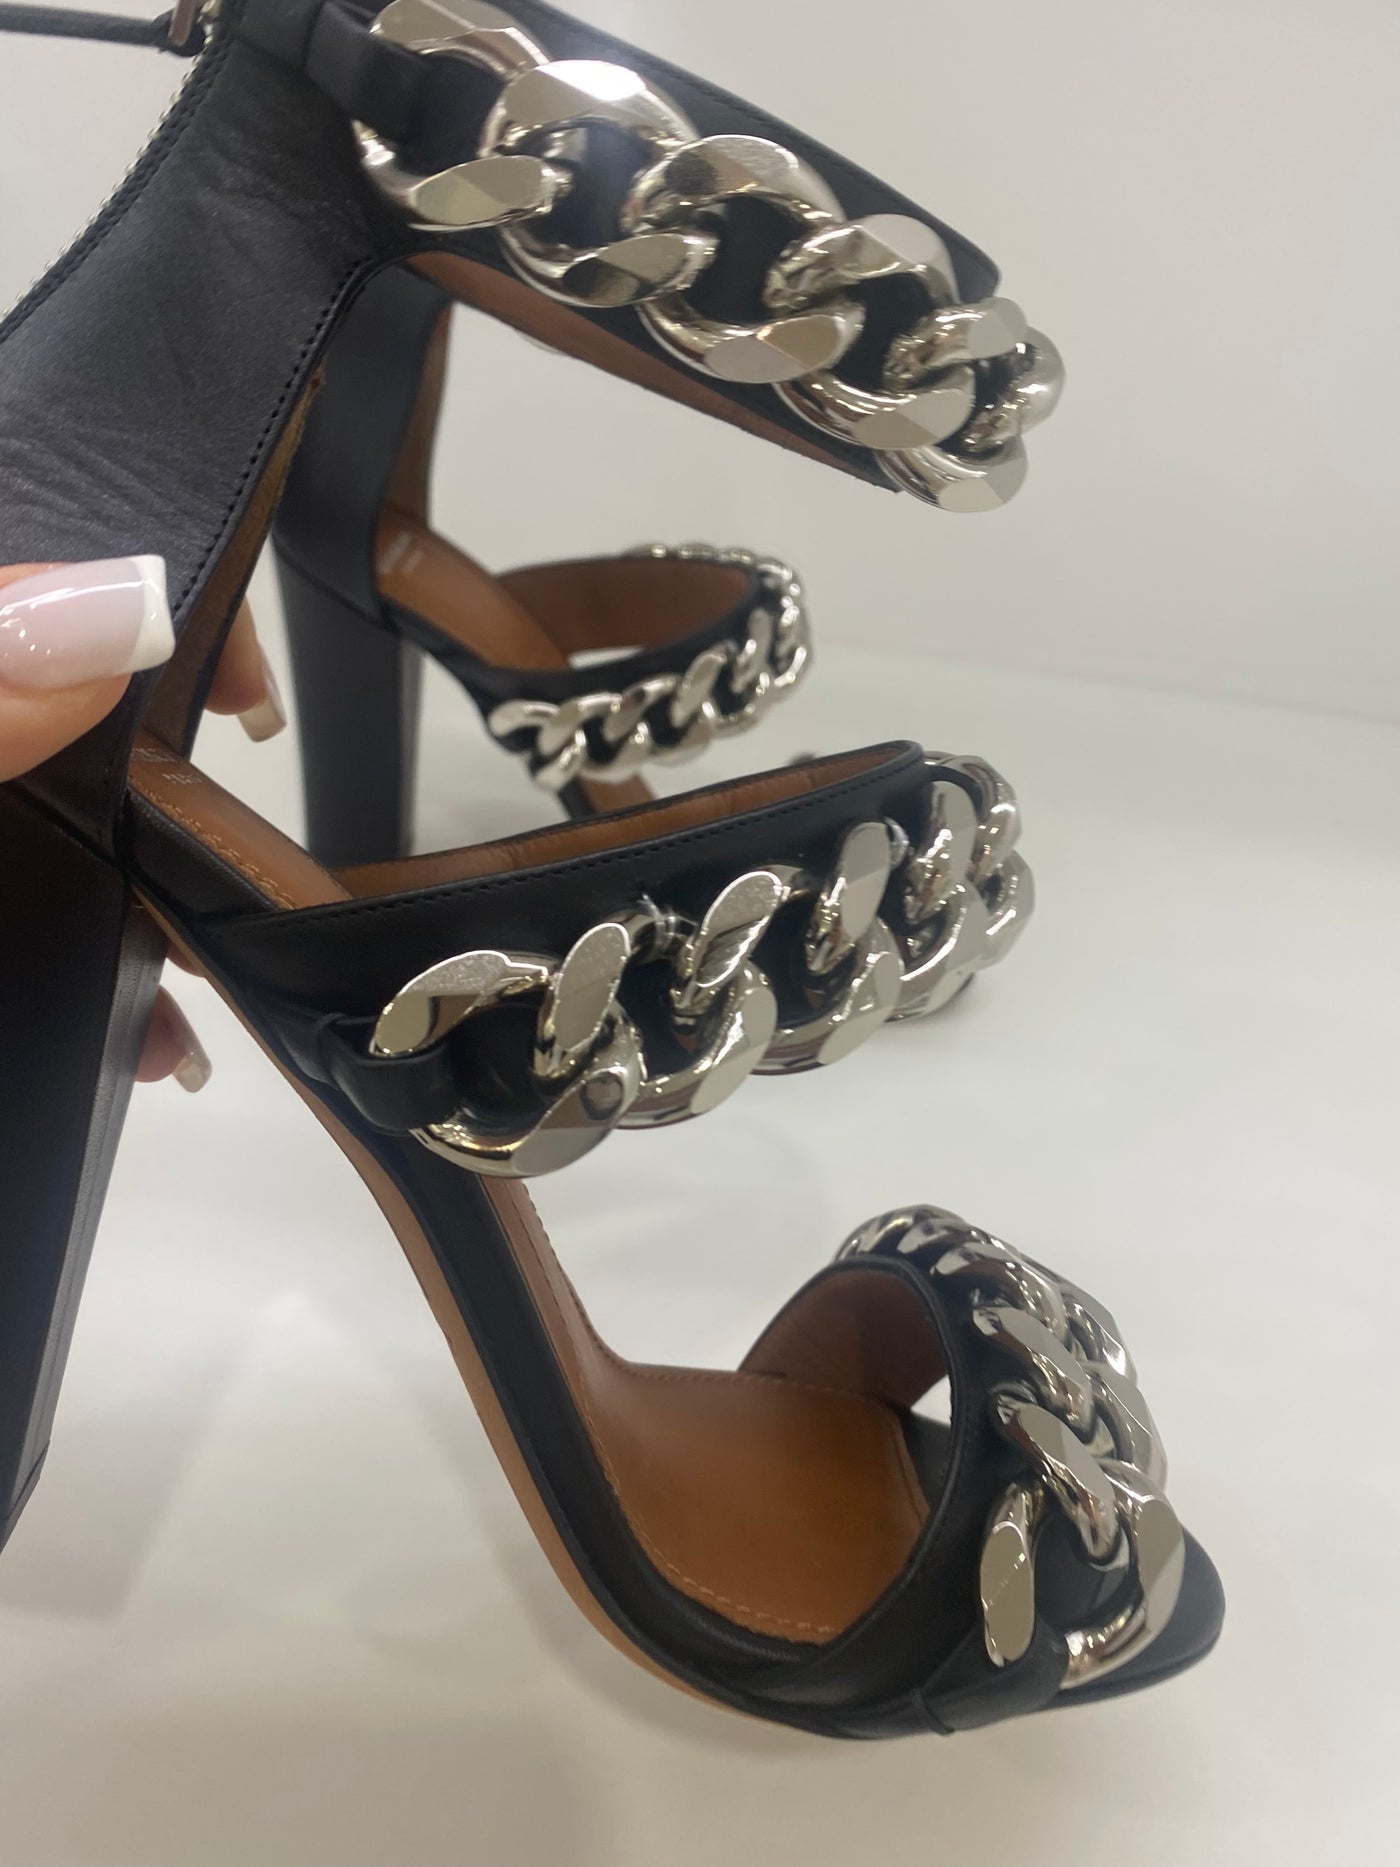 Givenchy Chain High Heels 35.5